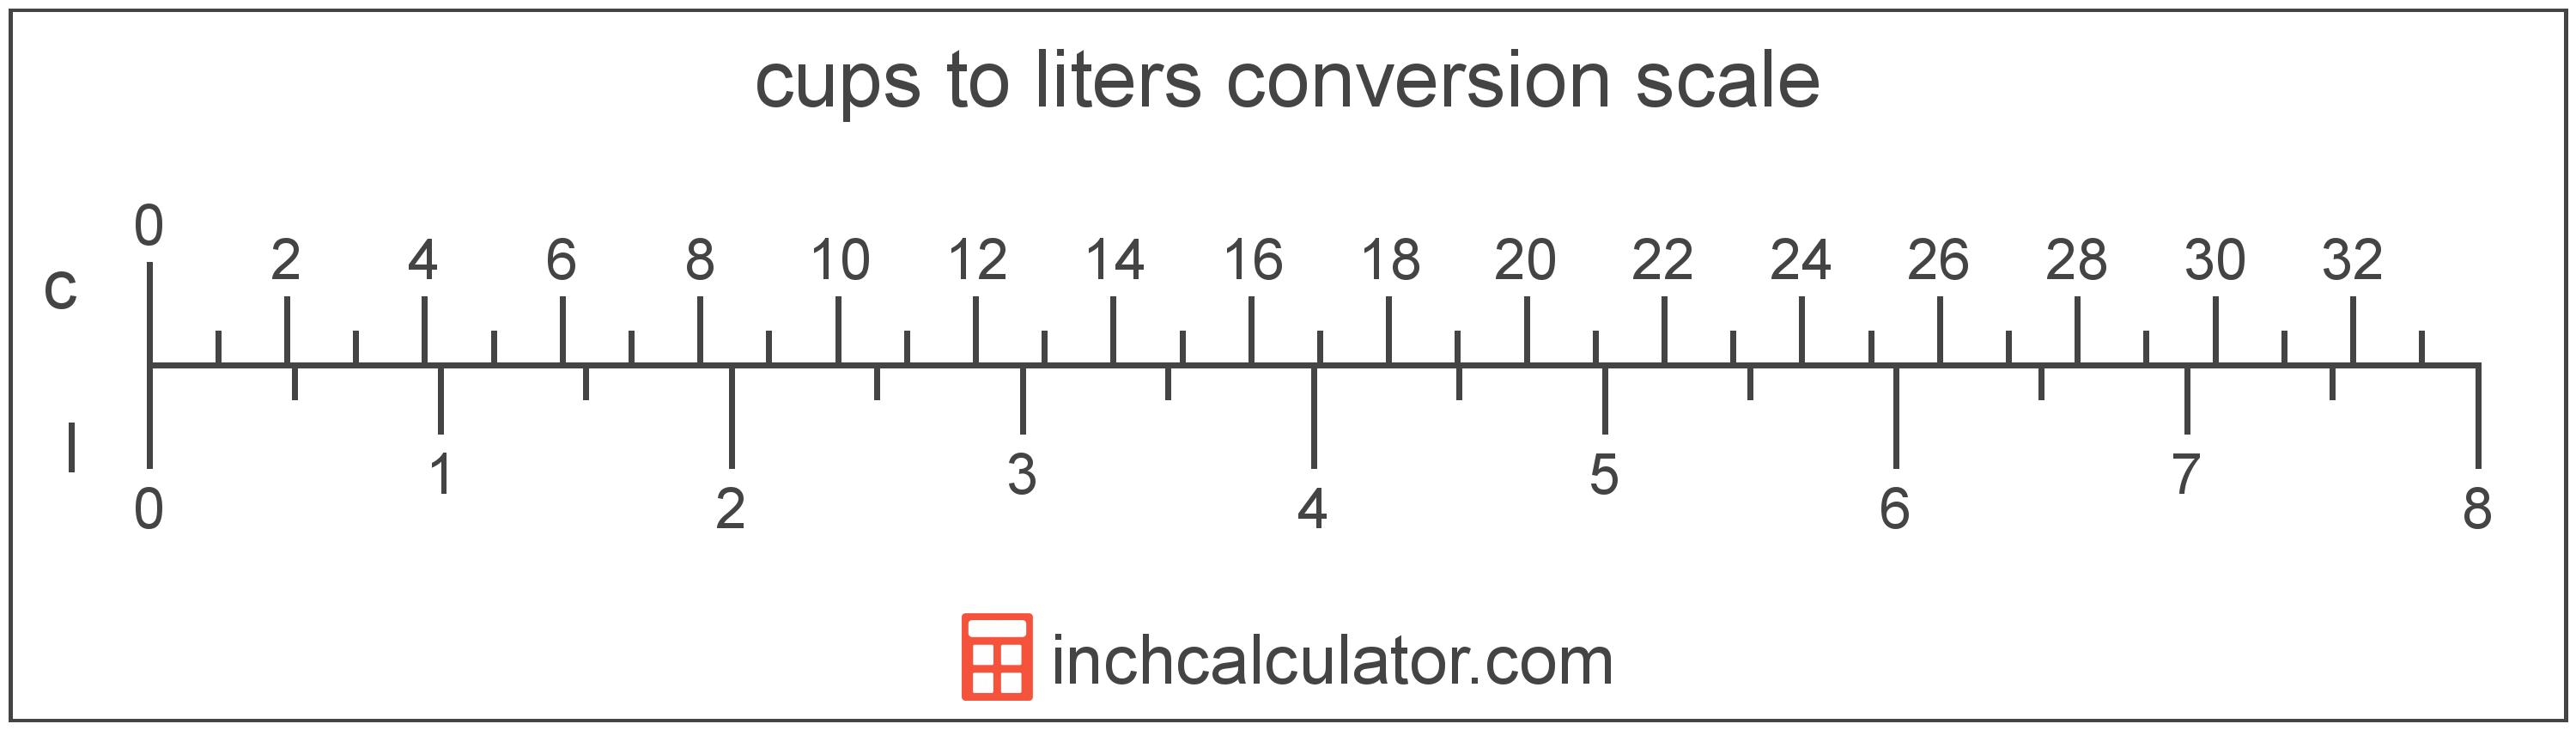 conversion scale showing liters and equivalent cups volume values